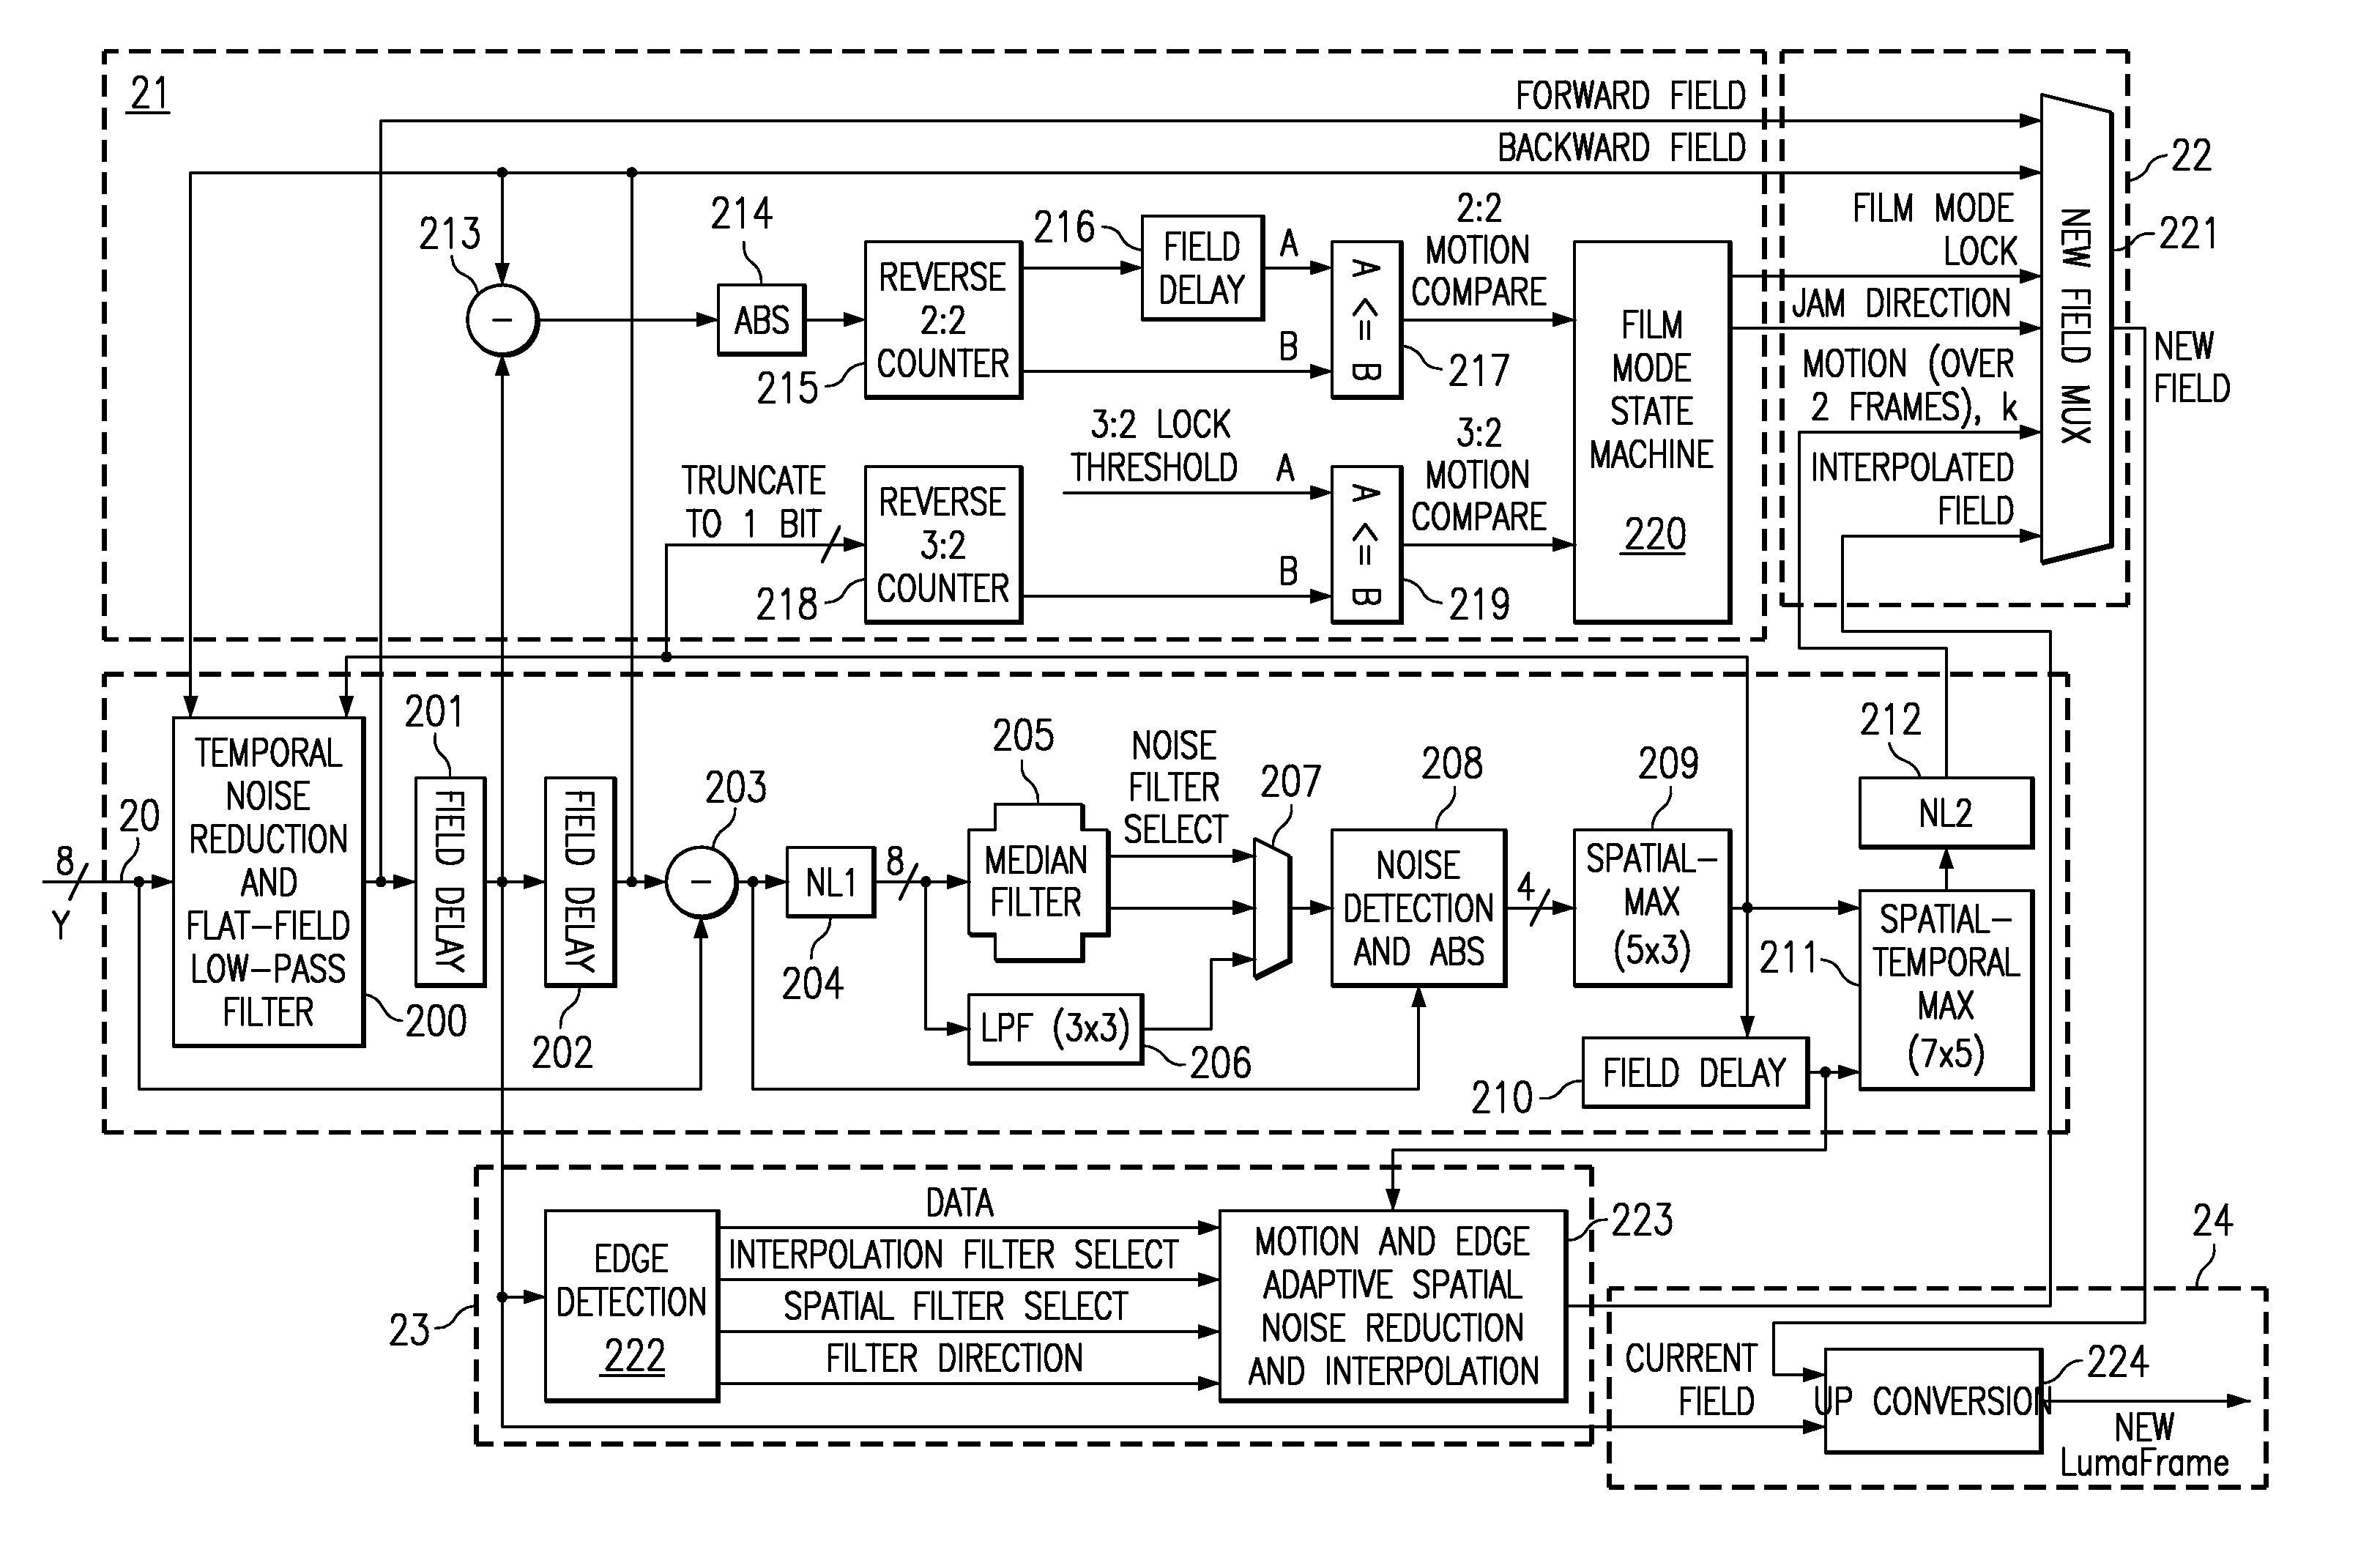 Content-Dependent Scan Rate Converter with Adaptive Noise Reduction